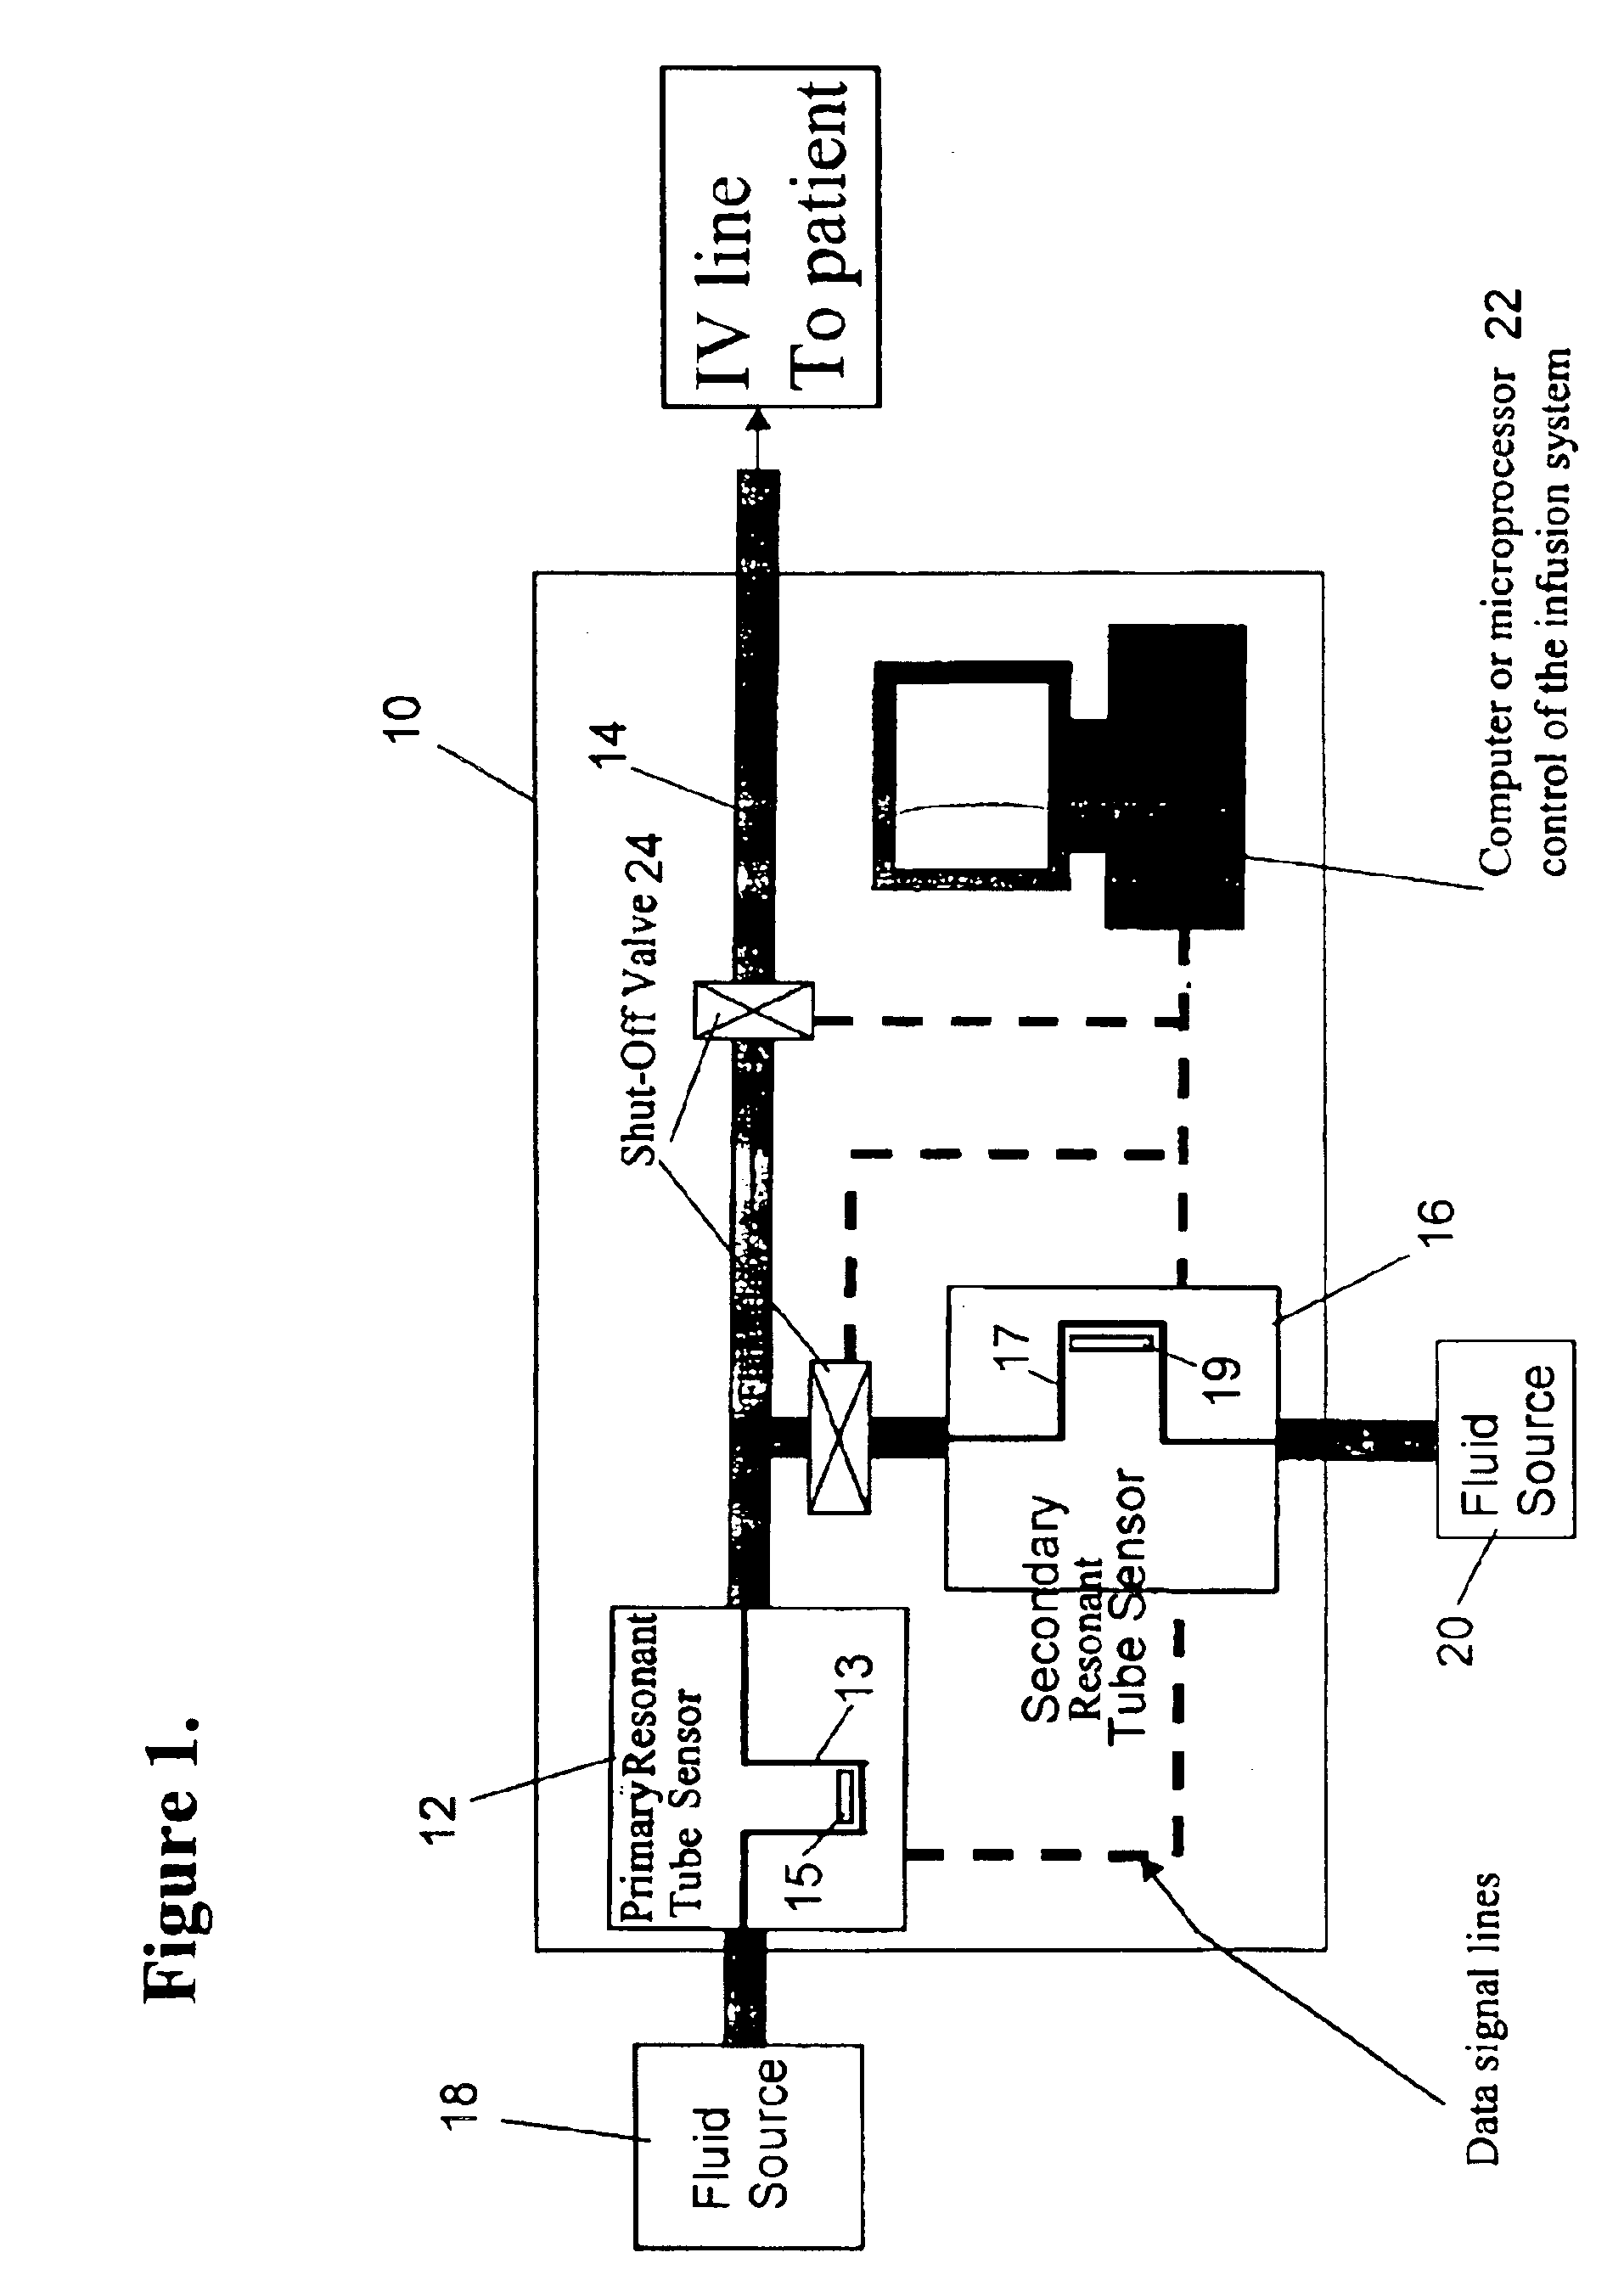 Fluid delivery system and method